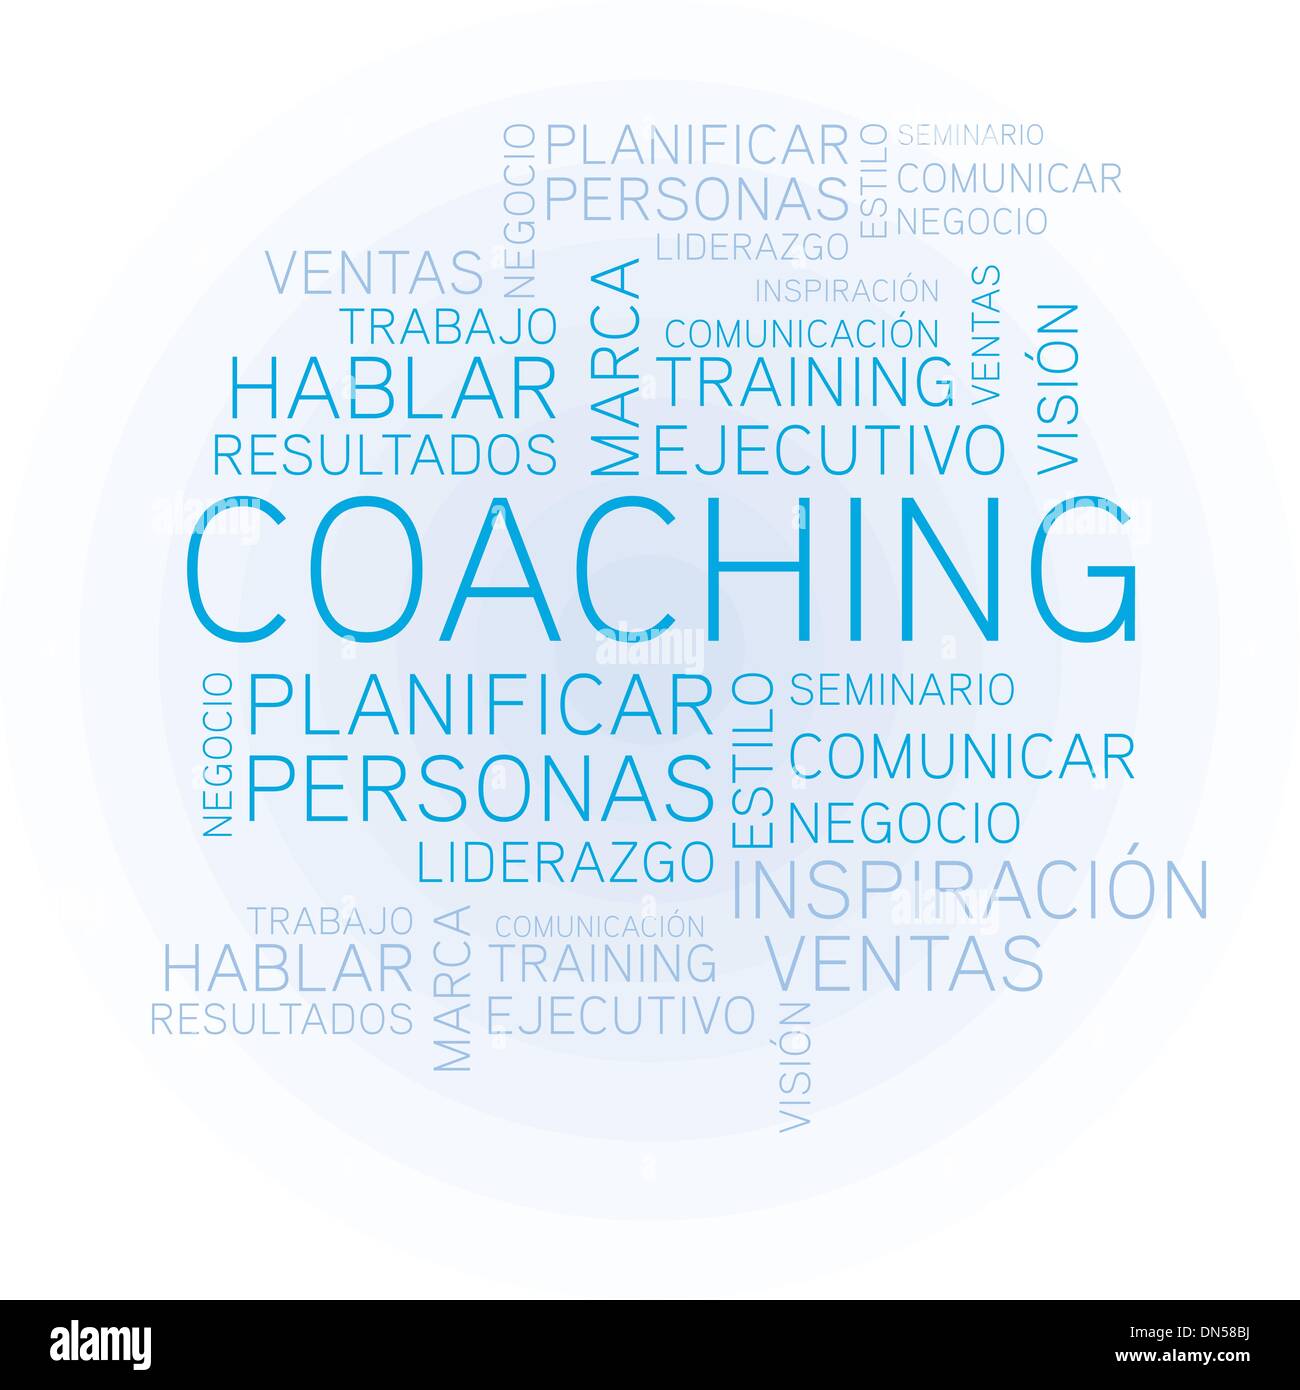 Coaching concept related spanish words in tag Stock Vector